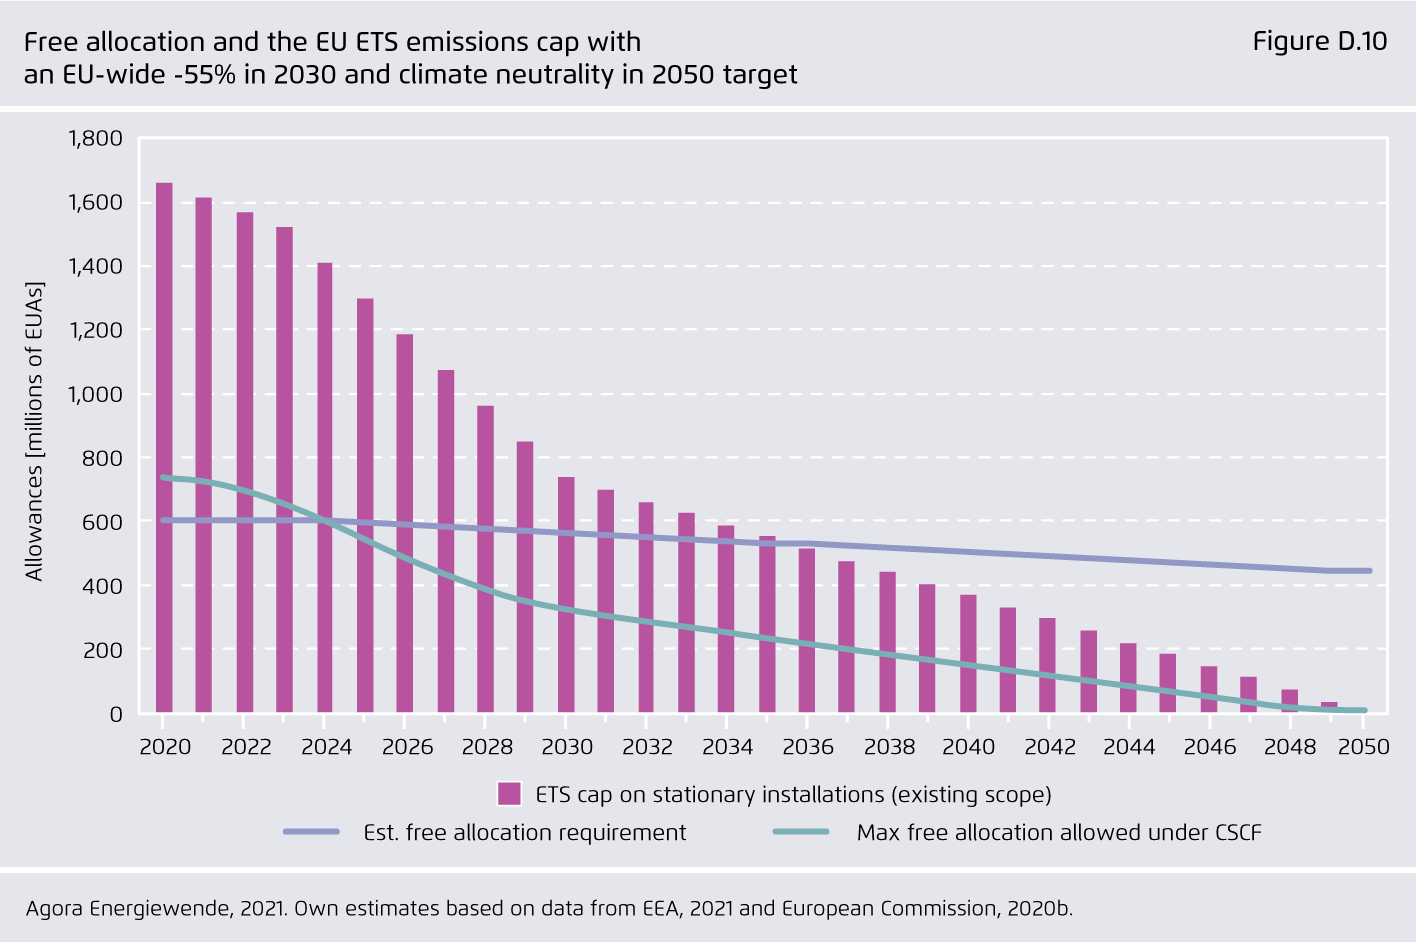 Preview for Free allocation and the EU ETS emissions cap with an EU-wide -55% in 2030 and climate neutrality in 2050 target